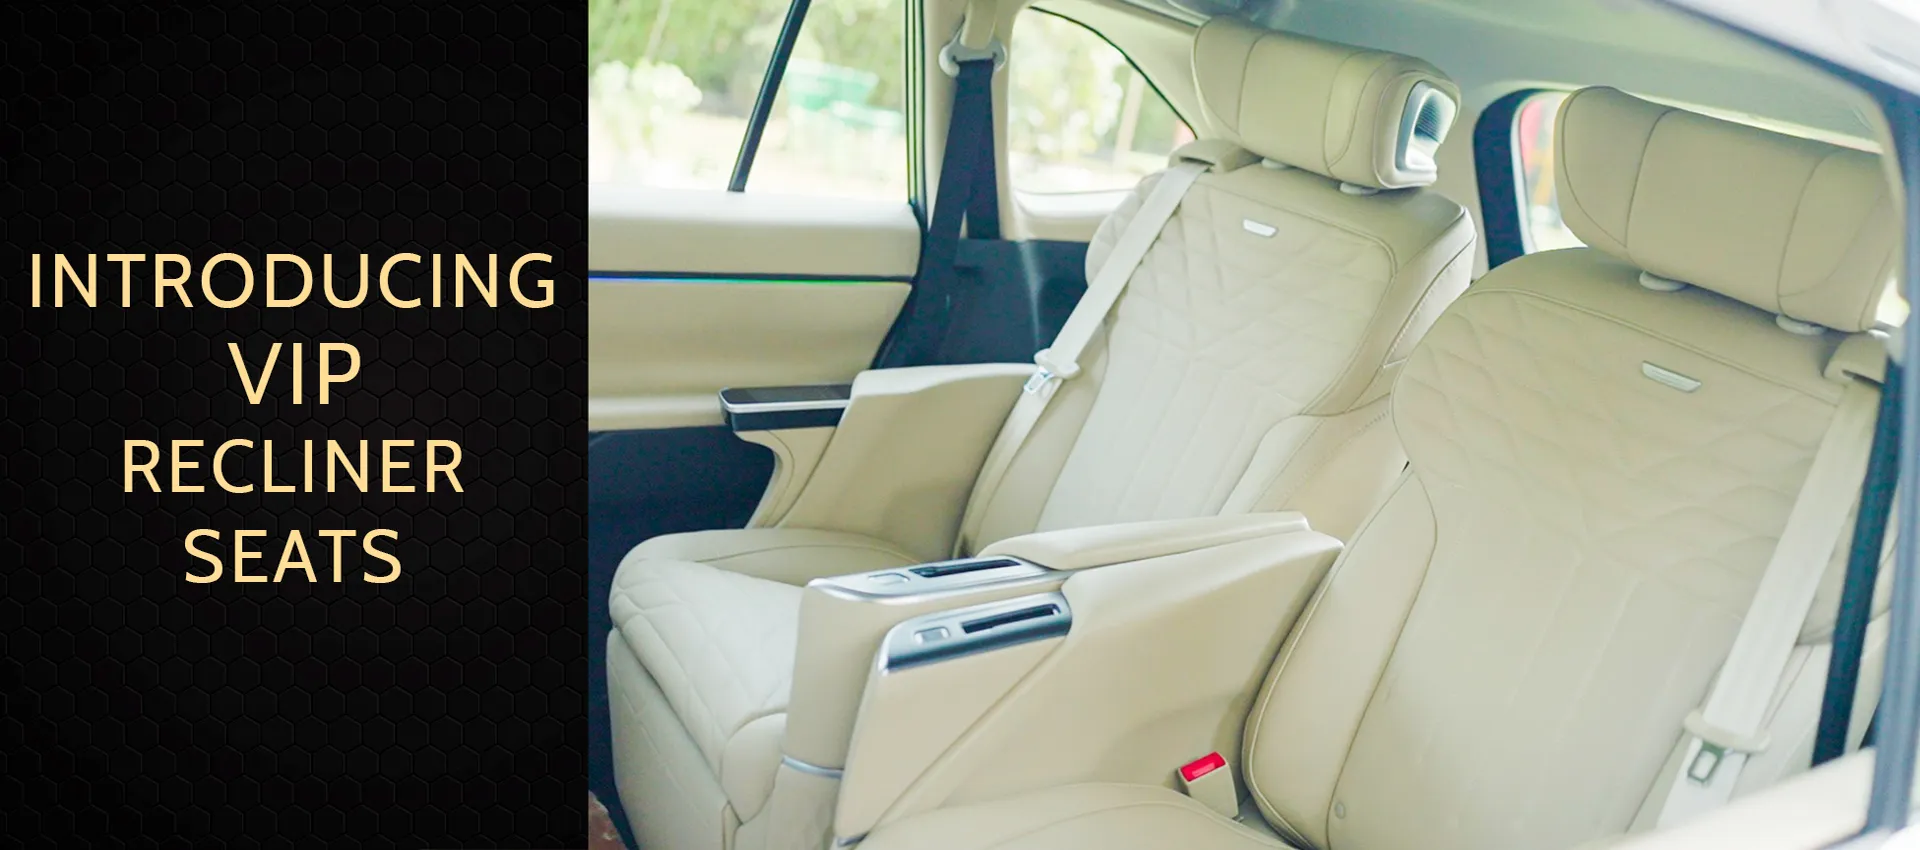 experience luxury travel: introducing vip recliner seats by top gear banner image homepage